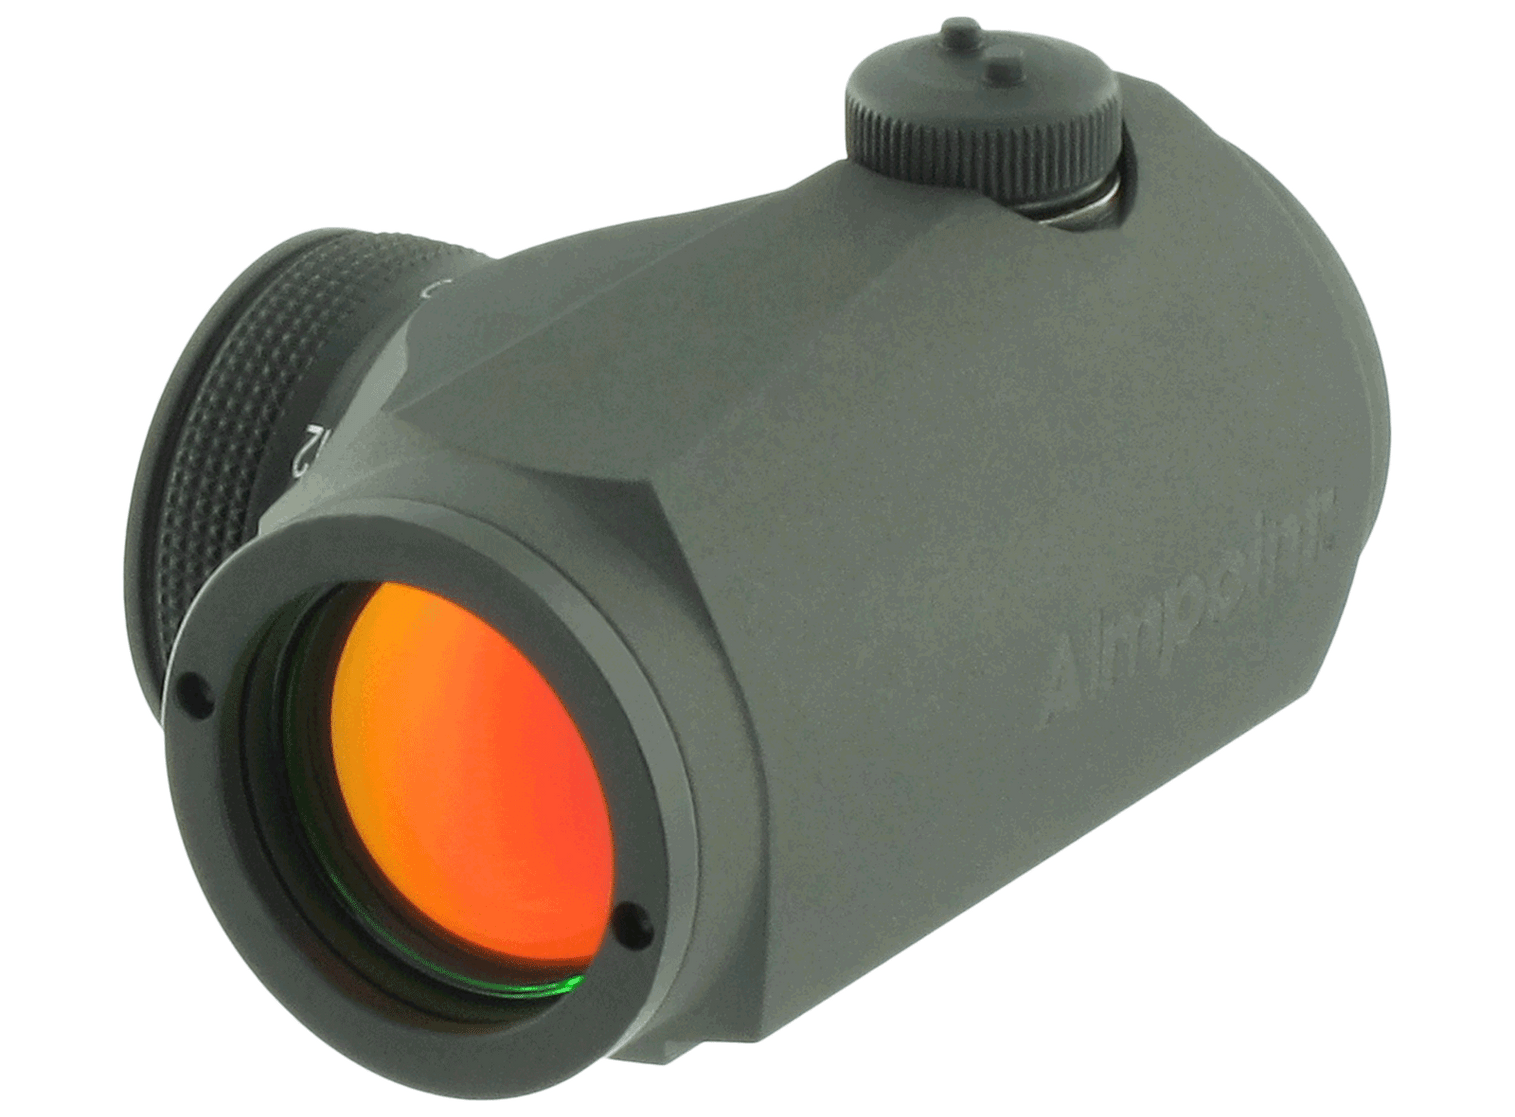 Aimpoint Micro T-1 2 MOA - Red Dot Reflex Sight